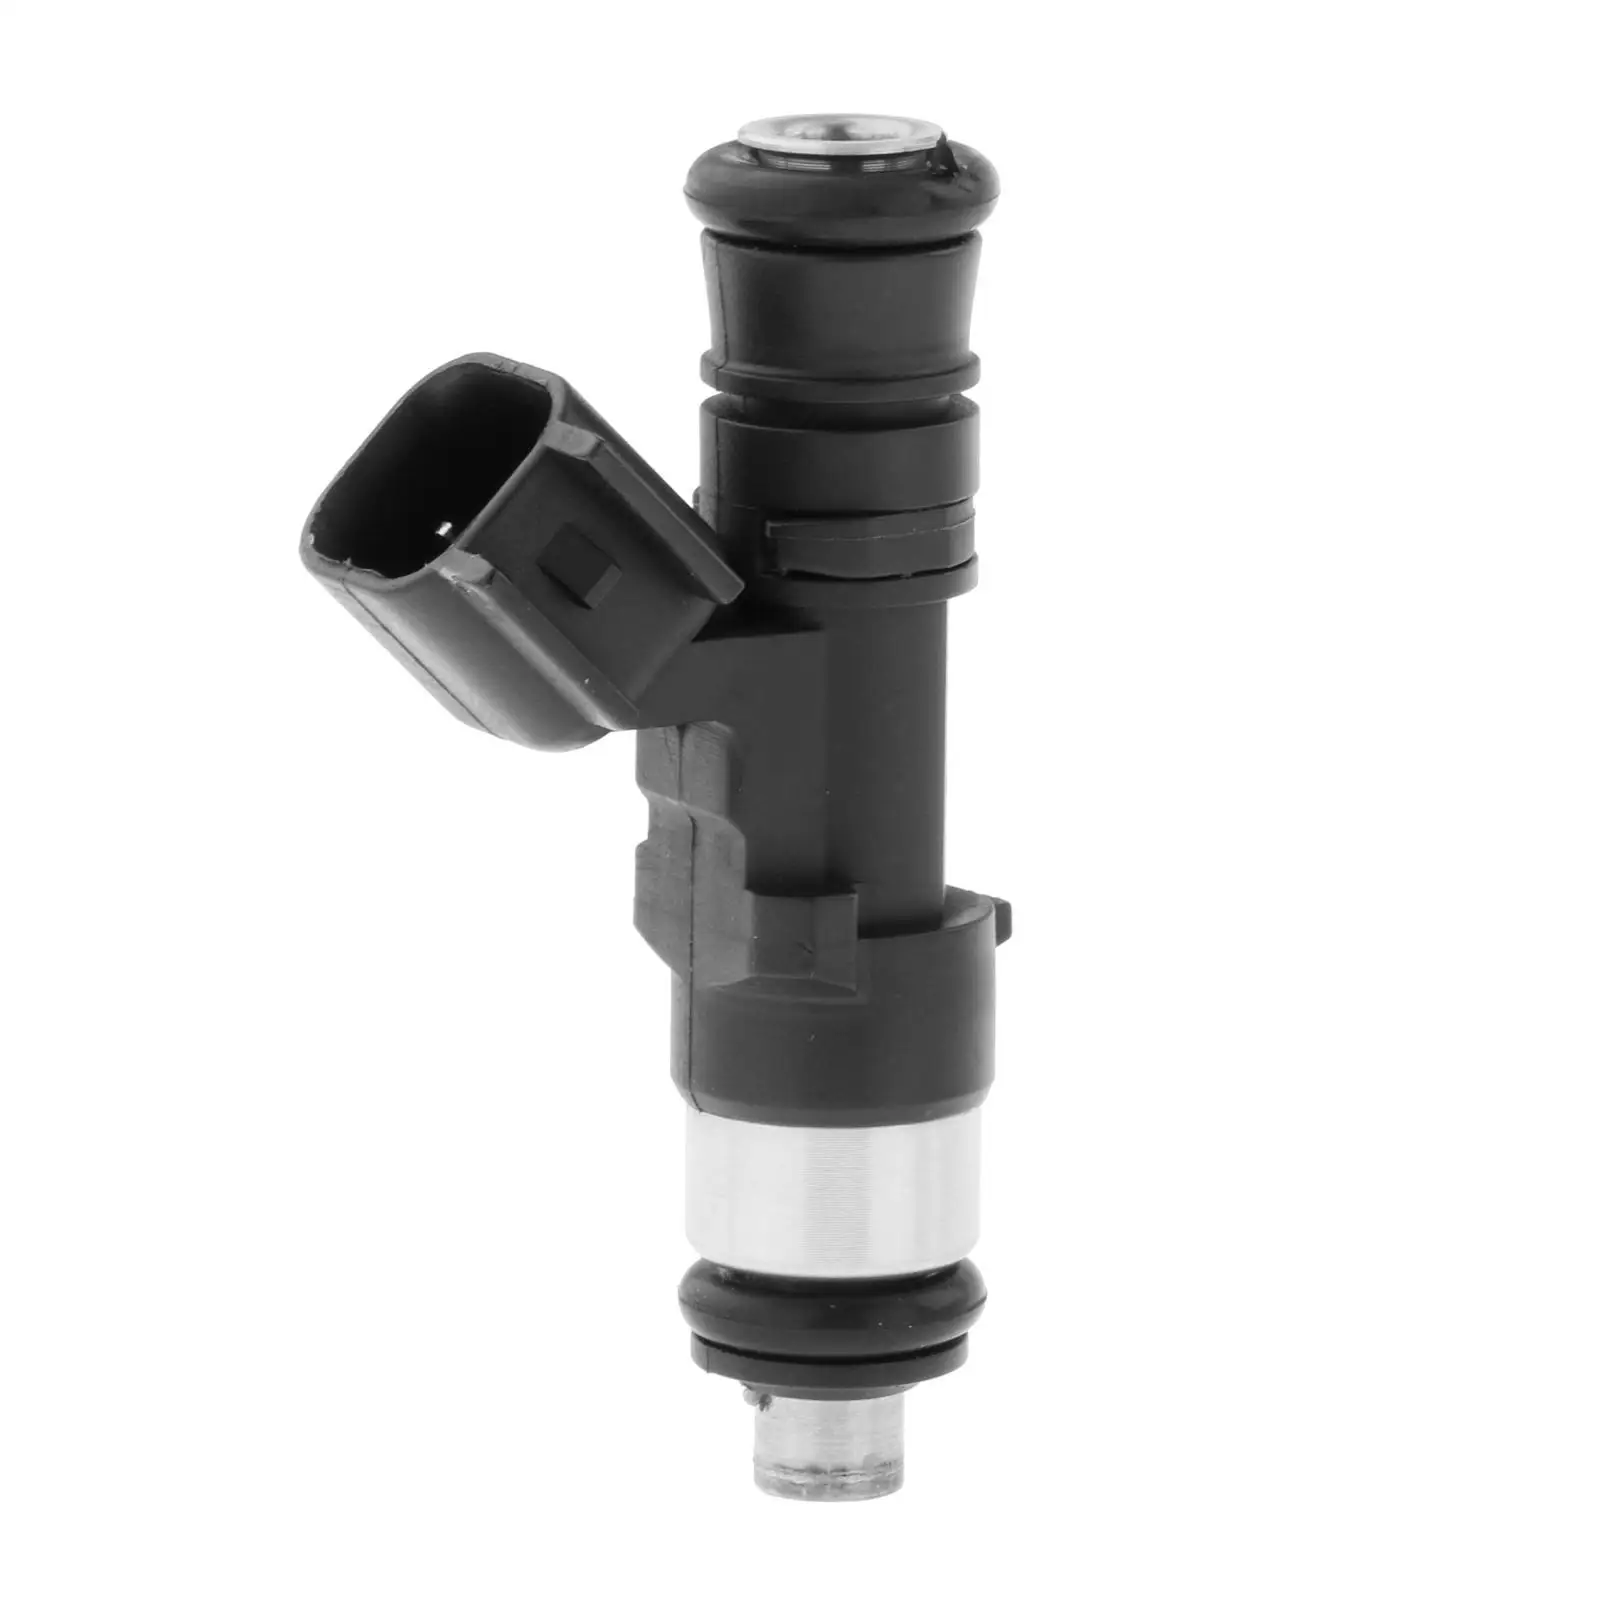 Fuel Injector Fits for Yamaha Outboard Motor 4 Stroke 200HP Accessories Replace 6DA-13761-00 Parts